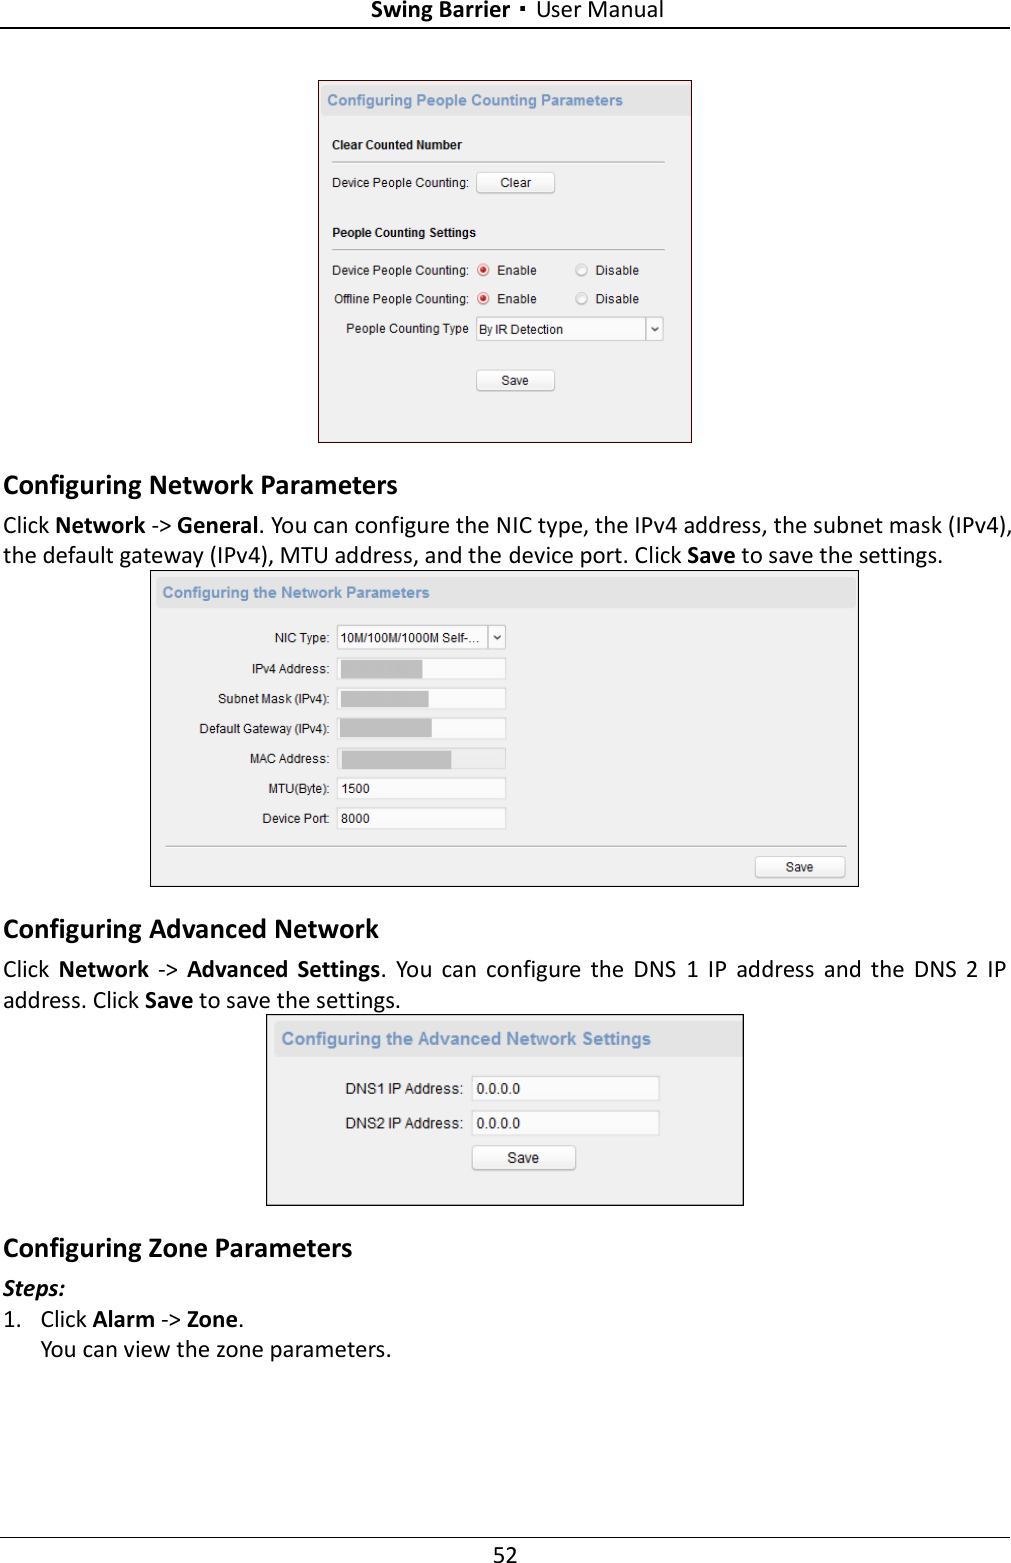 Swing Barrier·User Manual 52  Configuring Network Parameters Click Network -&gt; General. You can configure the NIC type, the IPv4 address, the subnet mask (IPv4), the default gateway (IPv4), MTU address, and the device port. Click Save to save the settings.  Configuring Advanced Network Click  Network  -&gt;  Advanced  Settings.  You  can  configure  the  DNS  1  IP  address  and  the  DNS  2  IP address. Click Save to save the settings.  Configuring Zone Parameters Steps: 1. Click Alarm -&gt; Zone.   You can view the zone parameters. 